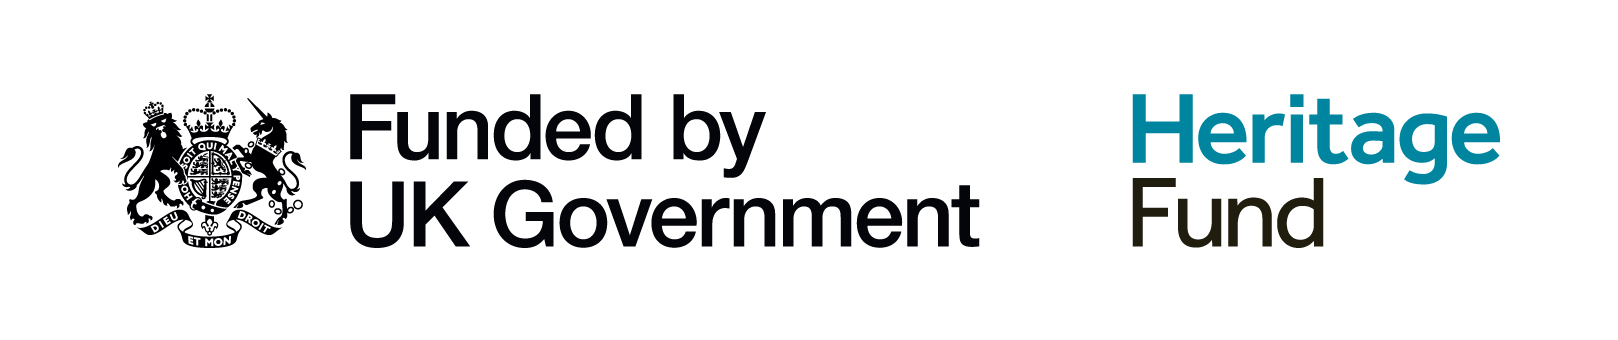 UK Government and Heritage Fund logos side by side